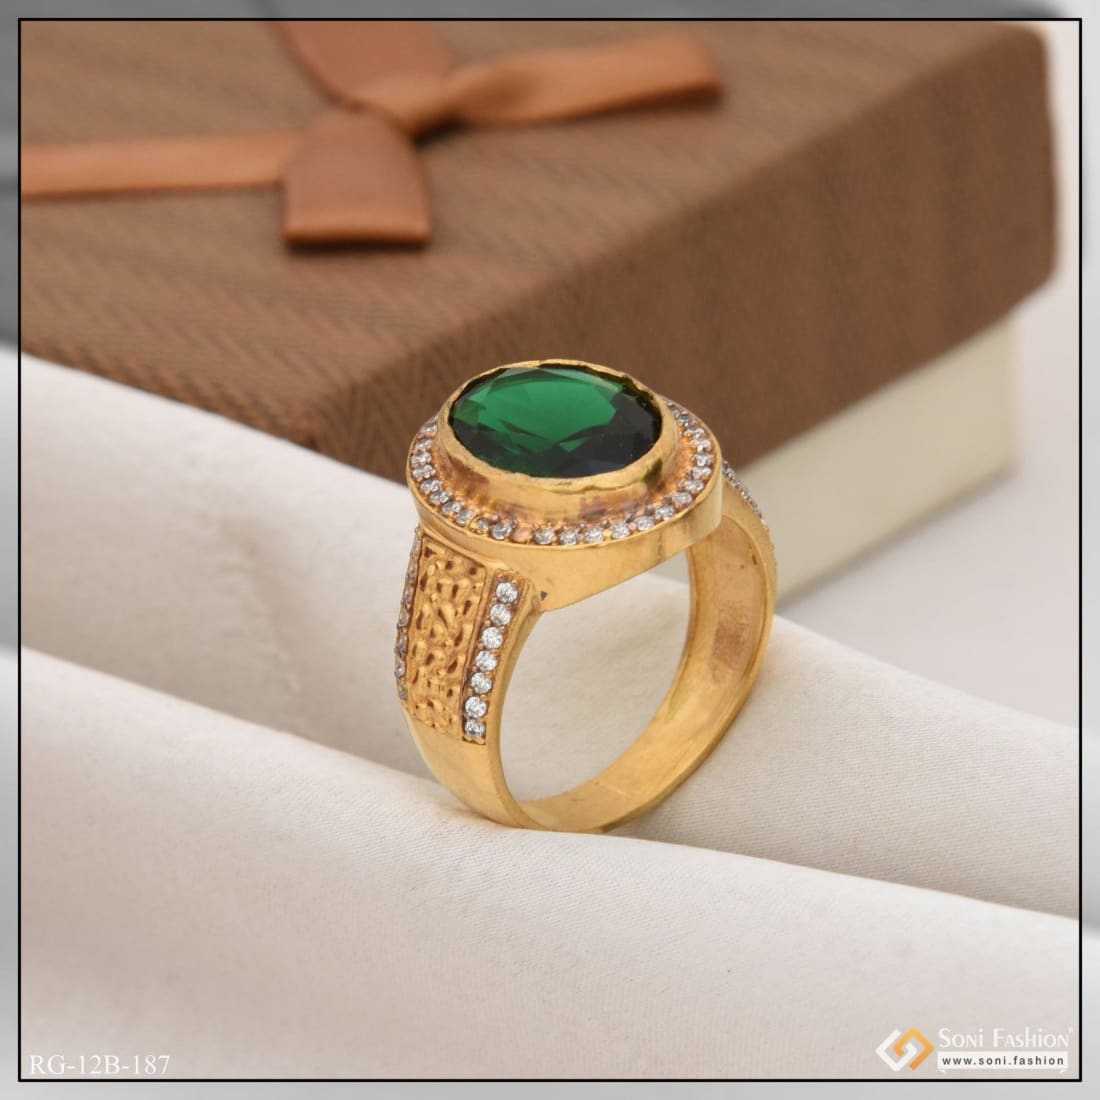 Buy AMG GEMS A1 Emerald Ring (Natural Panna/Panna stone) Quality Gemstone  Adjustable Ring Astrological Purpose For Men Women By Lab Certified (13.25  Ratti) at Amazon.in